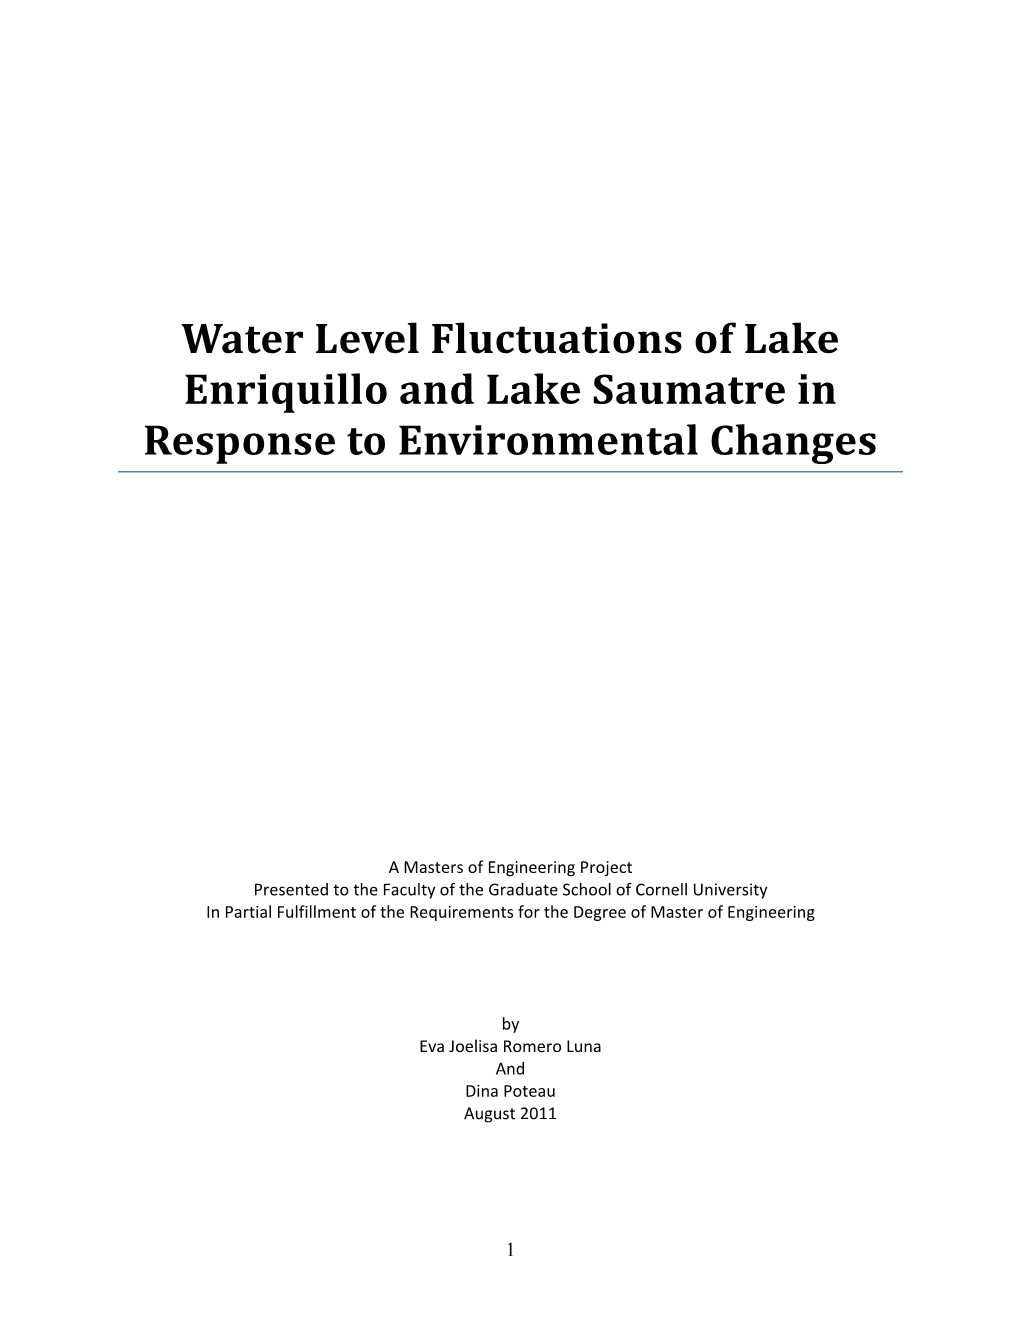 Water Level Fluctuations of Lake Enriquillo and Lake Saumatre in Response to Environmental Changes